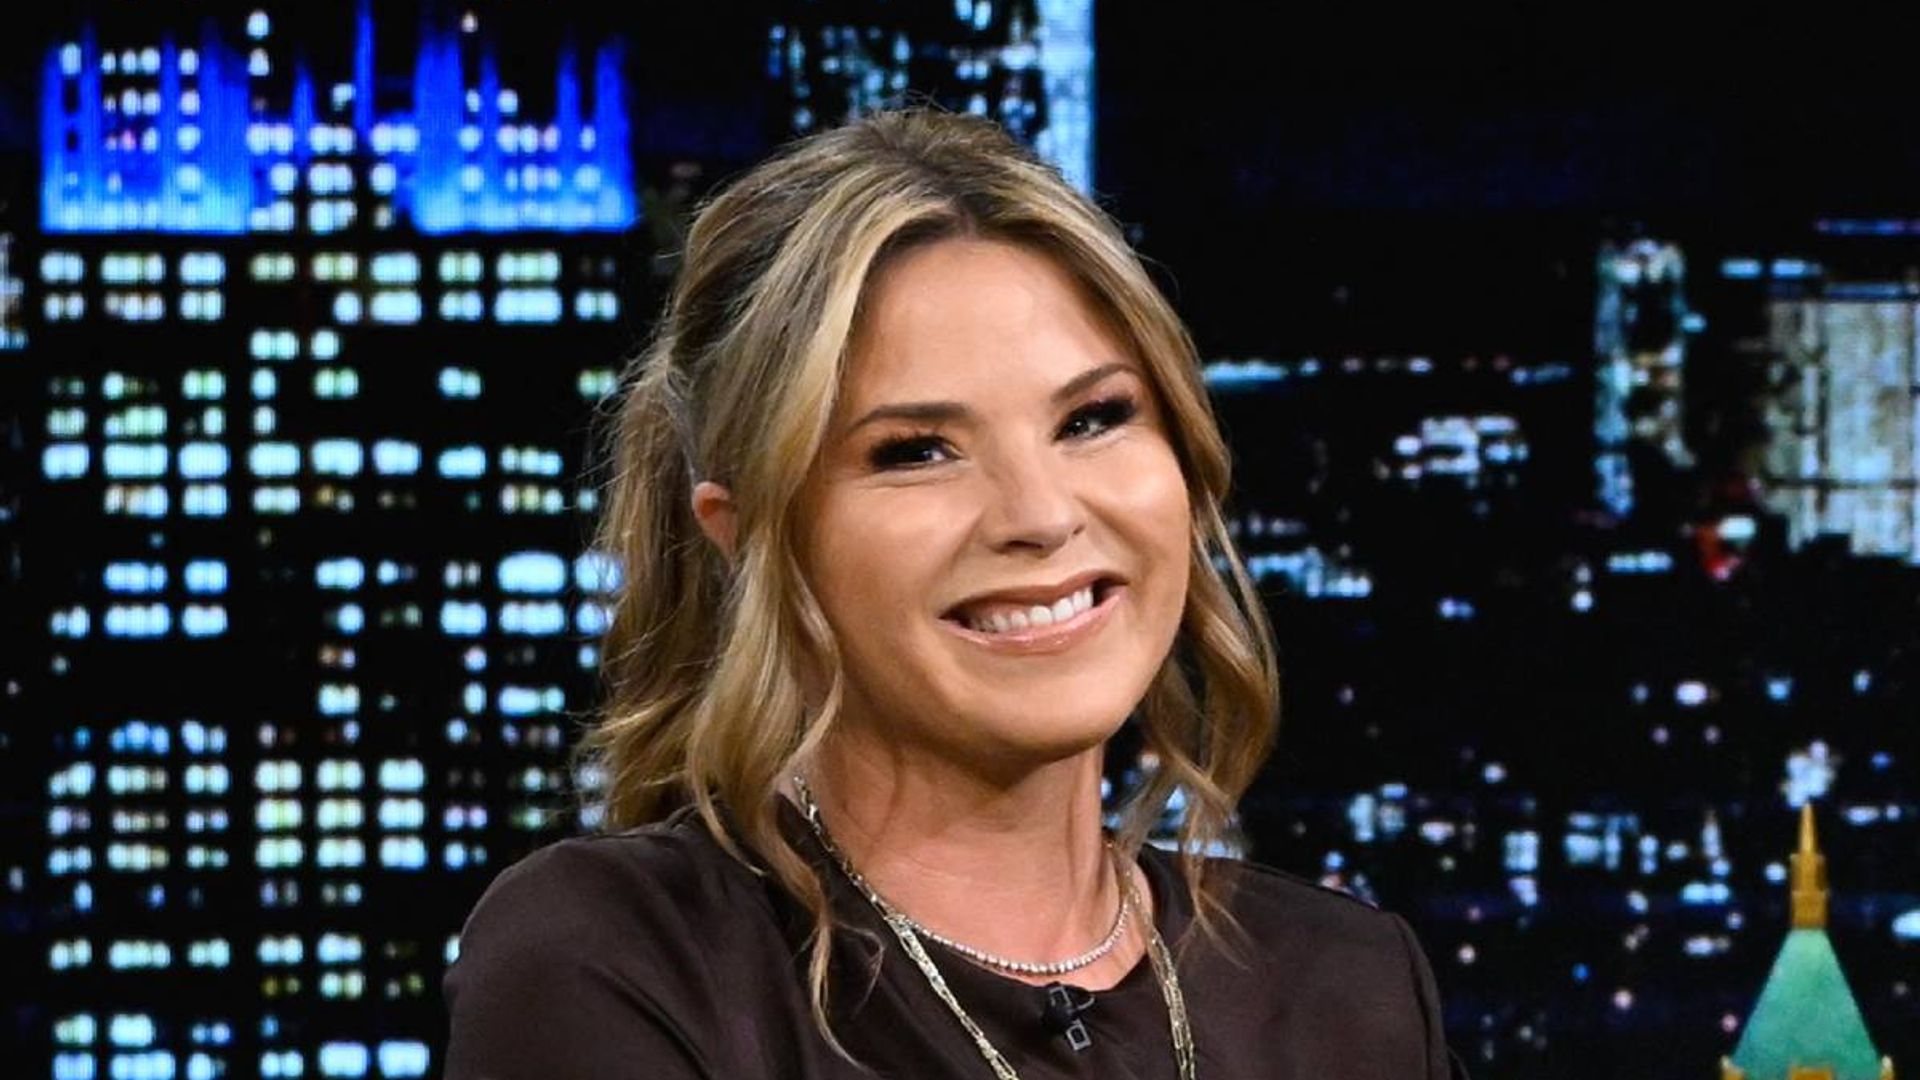 Jenna Bush Hager Admits She “Went Too Far” After Joking About Having An  Affair On 'Today With Hoda & Jenna': “Henry And I Are Very Happy” | Decider